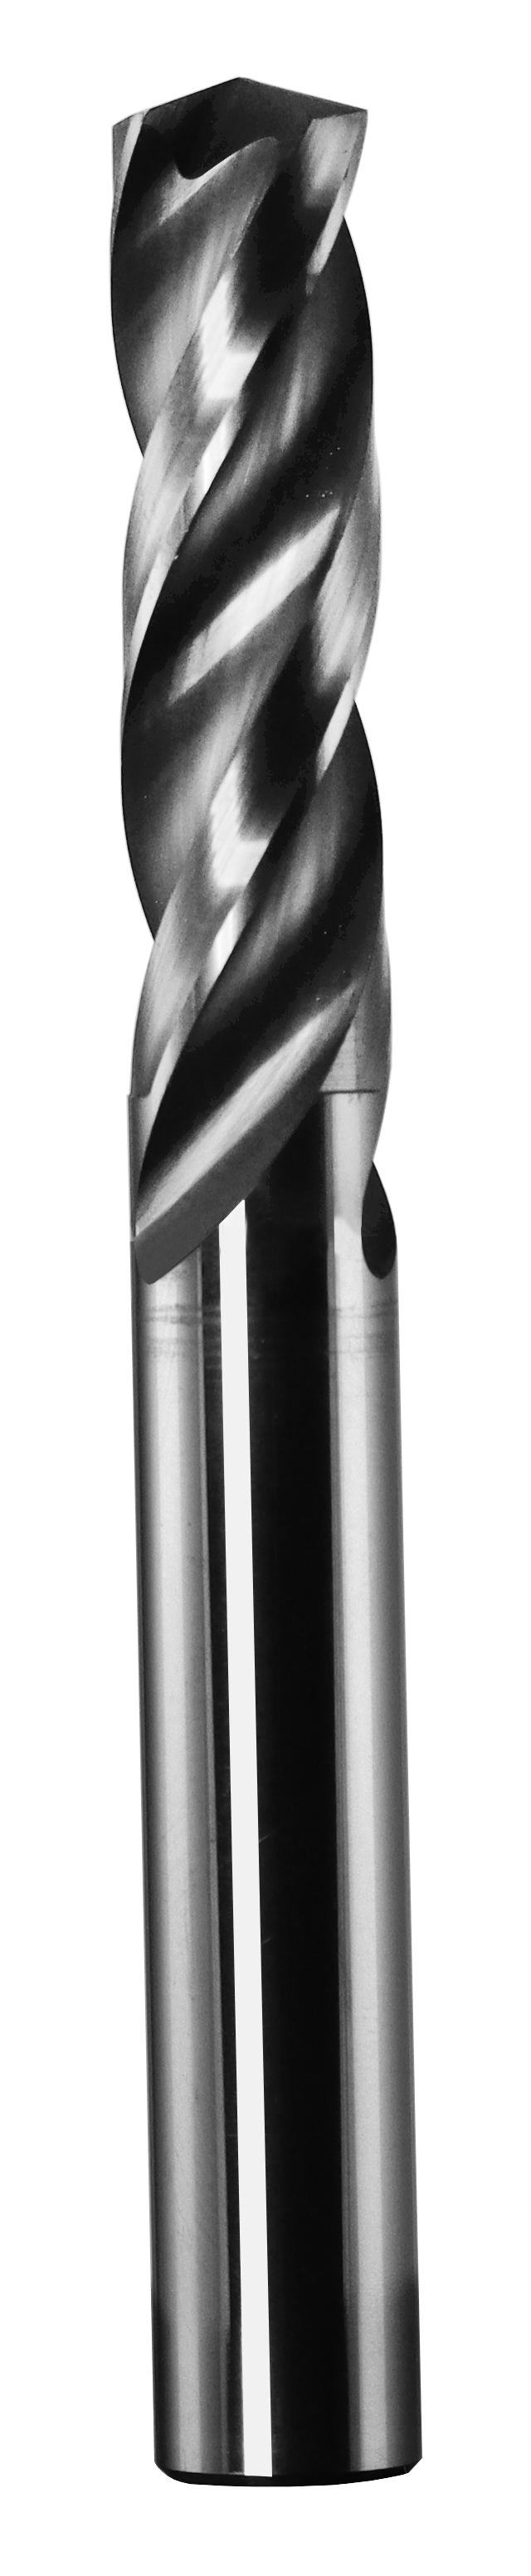 3.30mm Dia, 150 Degree Point, Solid Carbide Drill - 63001